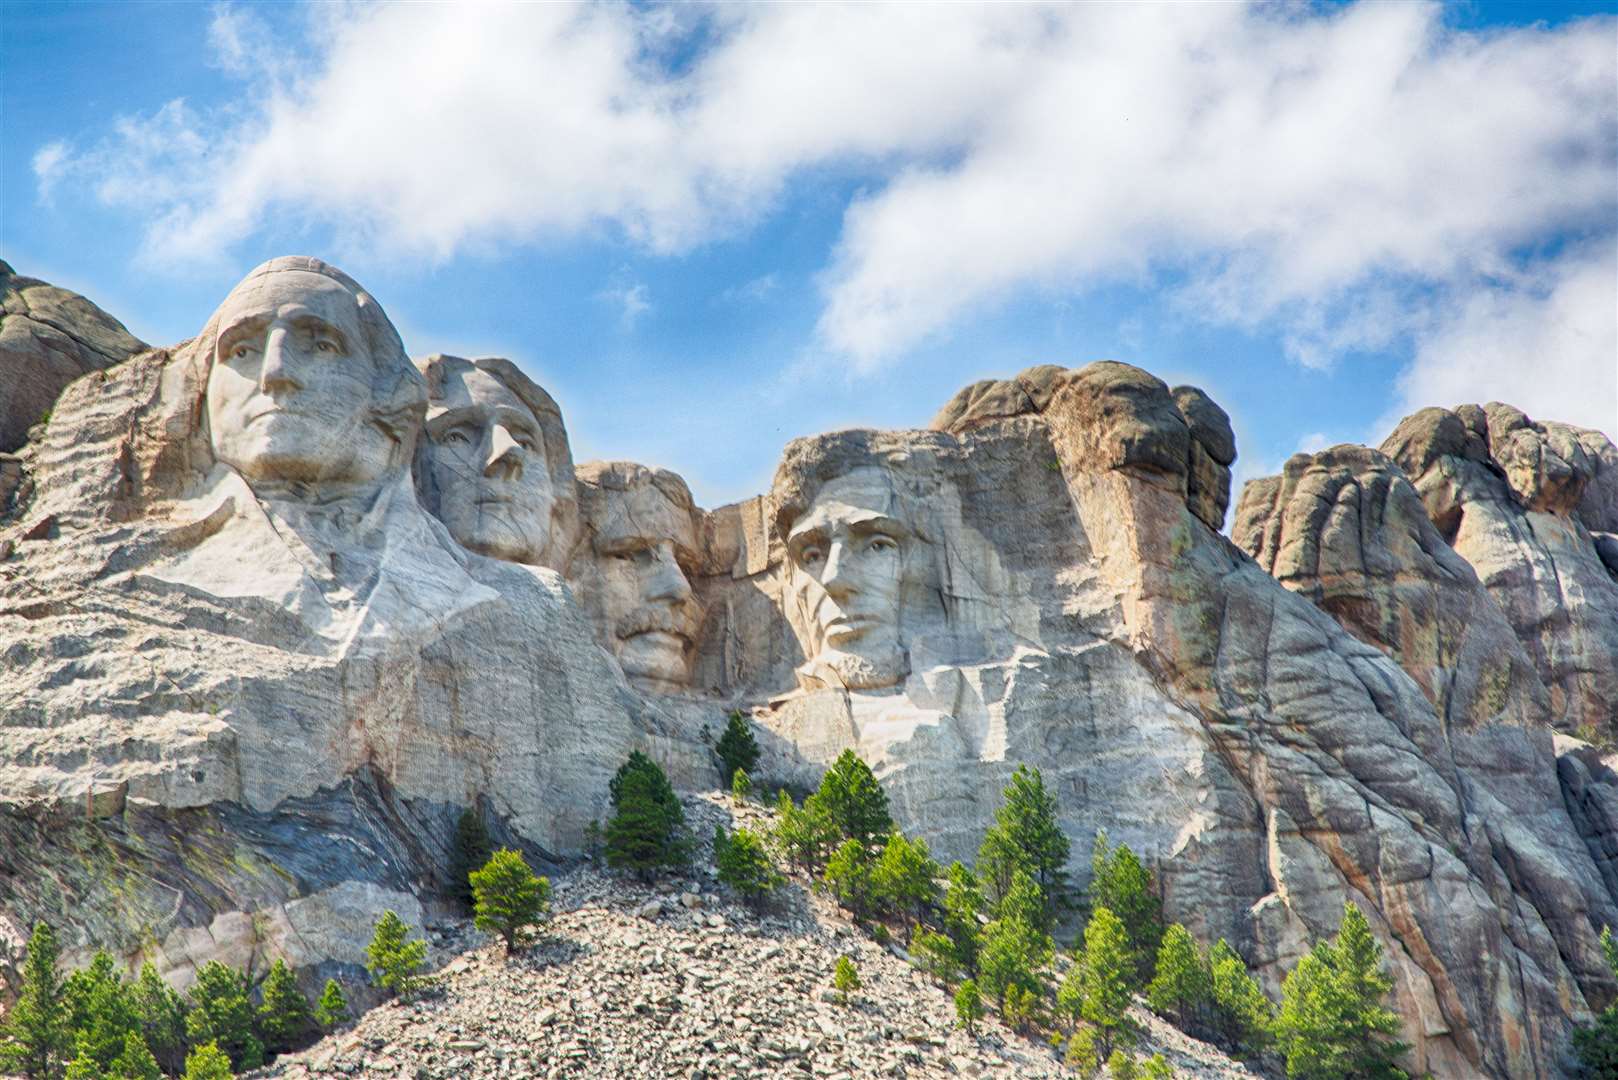 The Mount Rushmore national monument in South Dakota